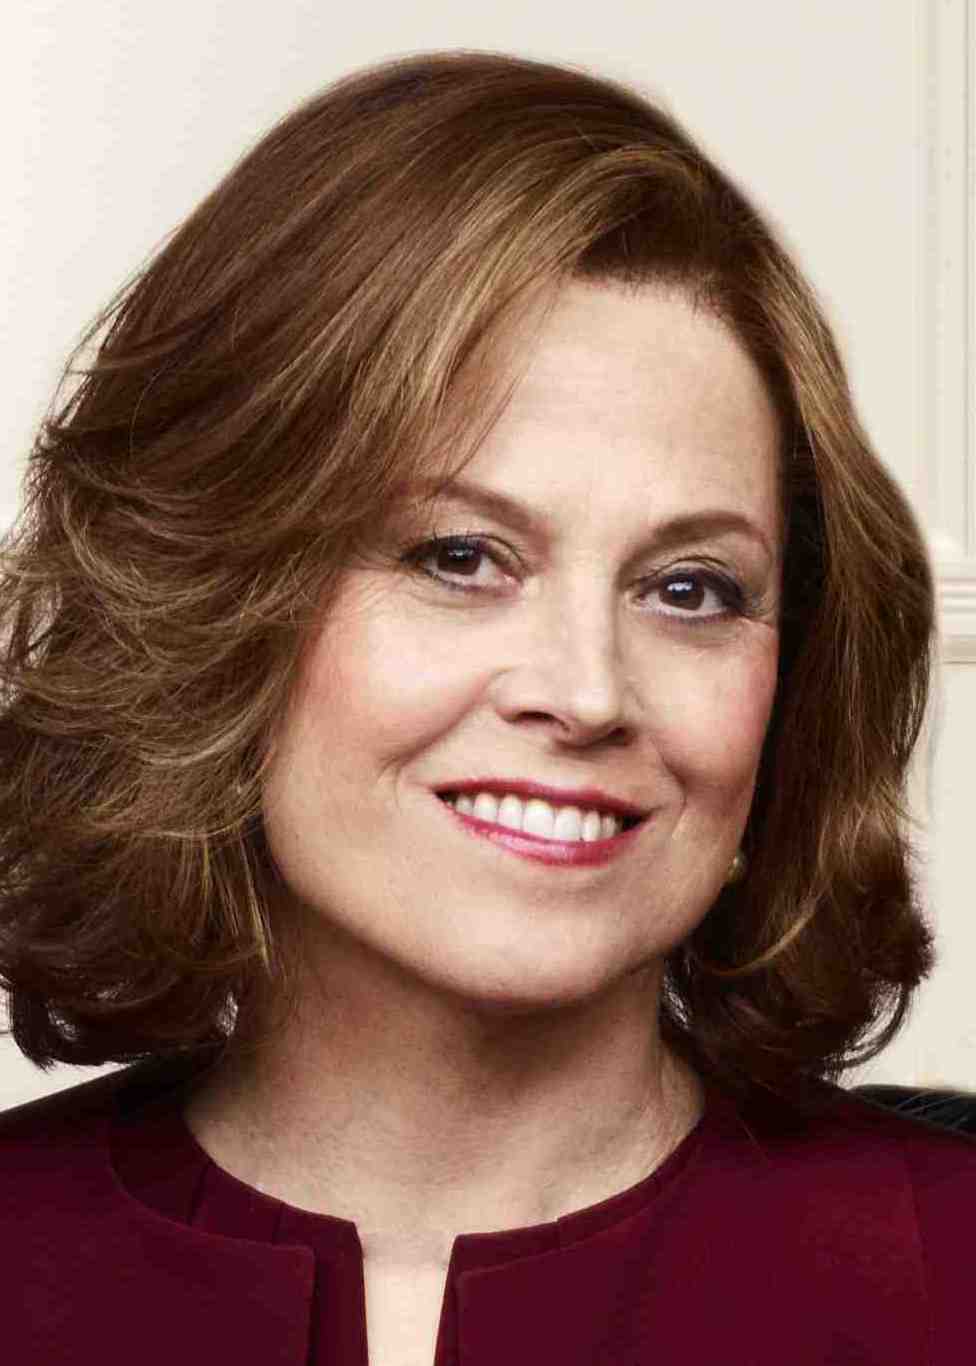 Sigourney Weaver Nude Map Of The World - United States Map